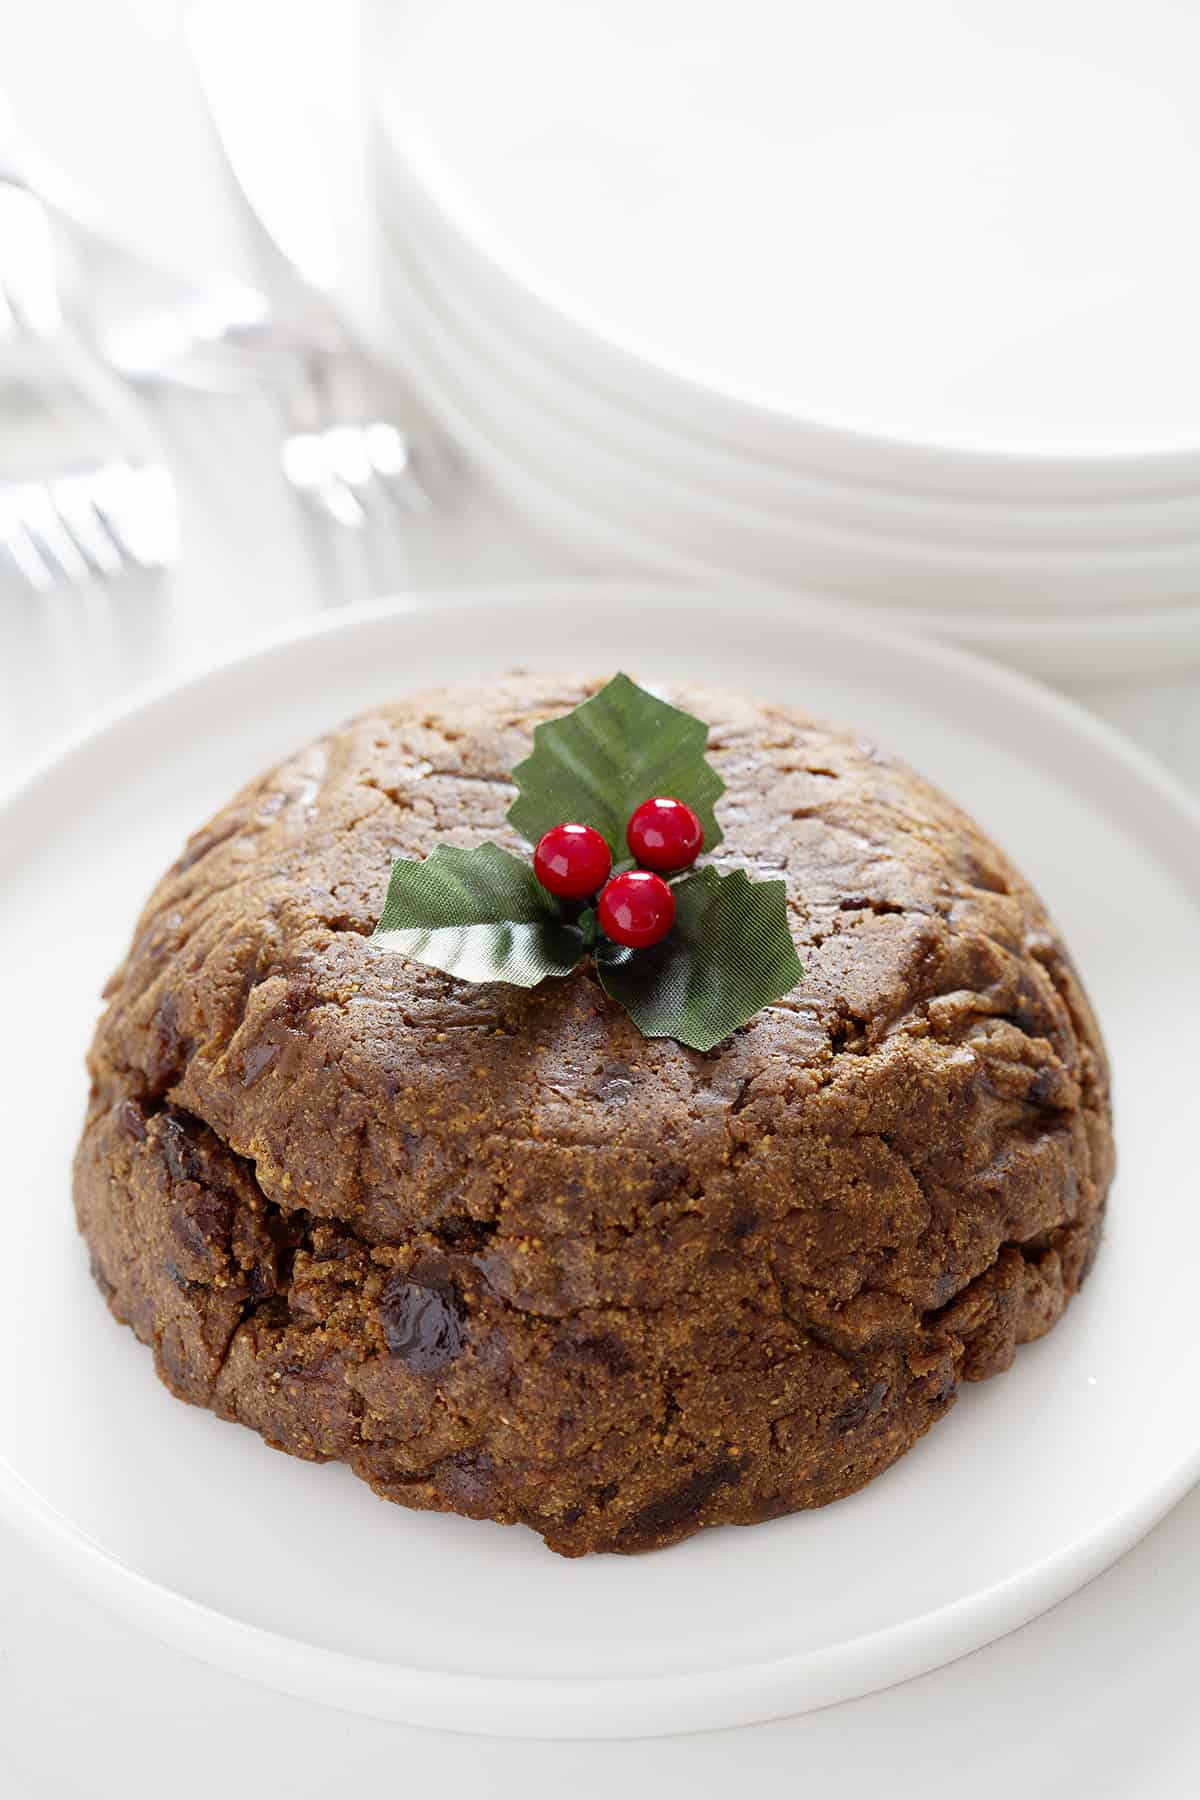 holly garnished Christmas pudding with flatware and plates in background